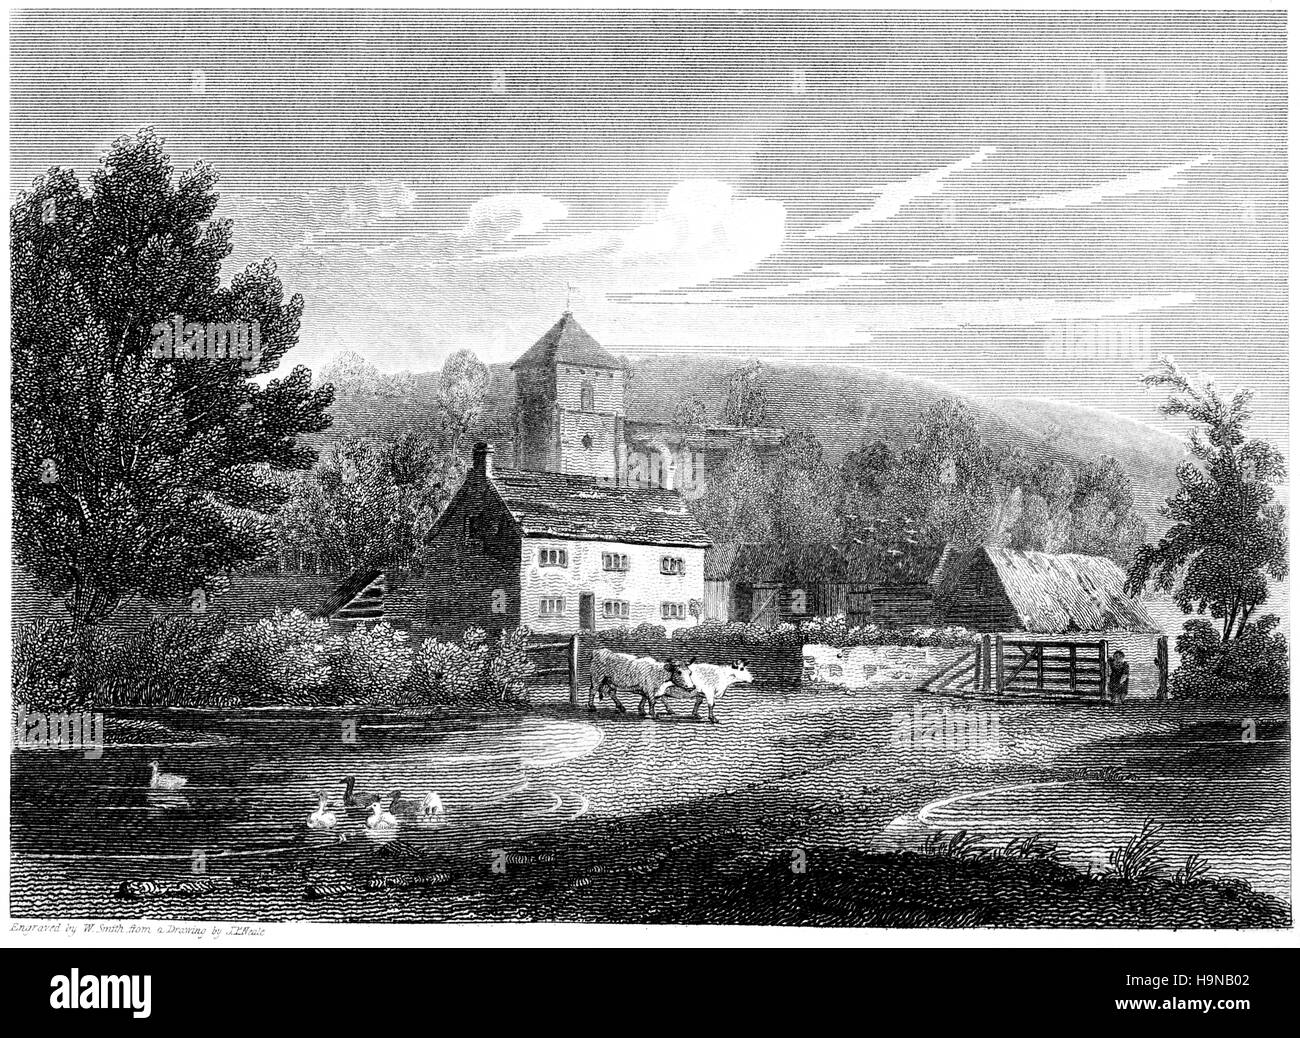 An engraving of New Radnor, Radnorshire scanned at high resolution from a book printed in 1812. Believed copyright free. Stock Photo